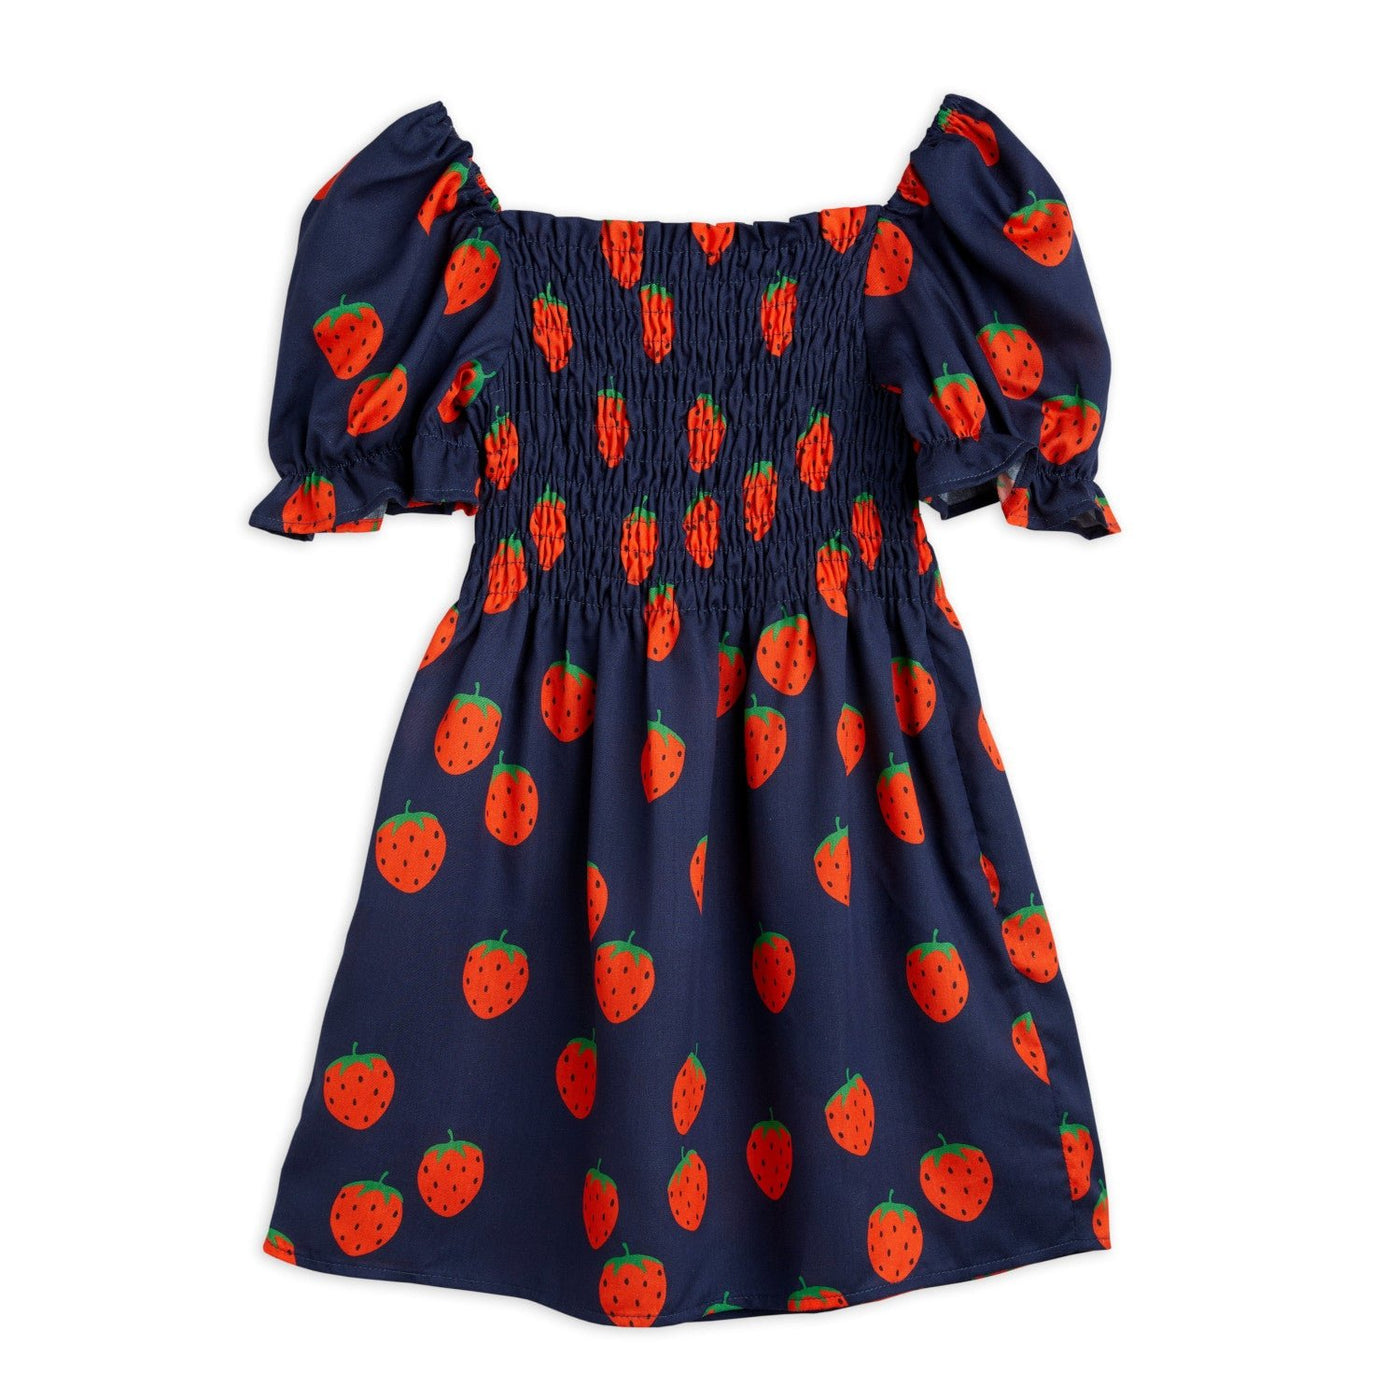 Strawberries Woven Puff Sleeves Dress in Blue by Mini Rodini - Petite Belle